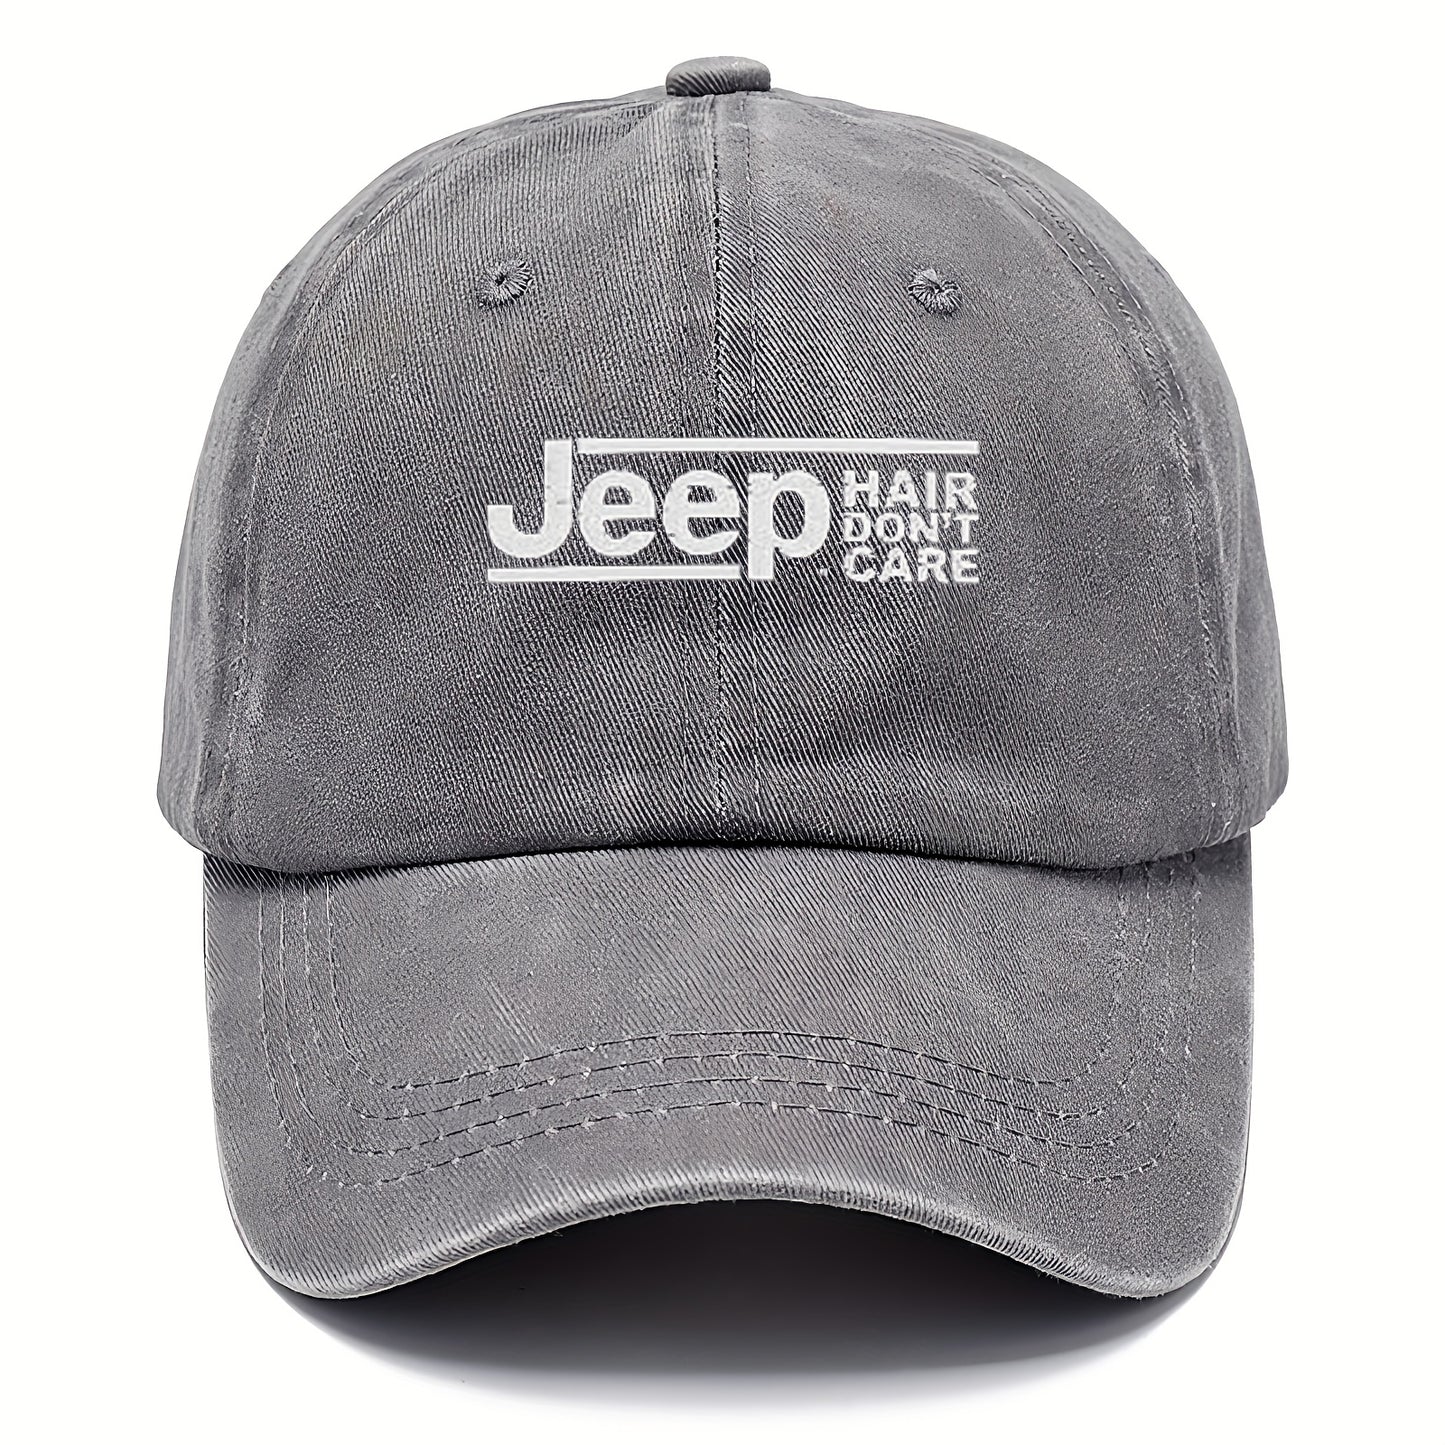 Washed Vintage: Jeep Hair Don't Care Classic Cap